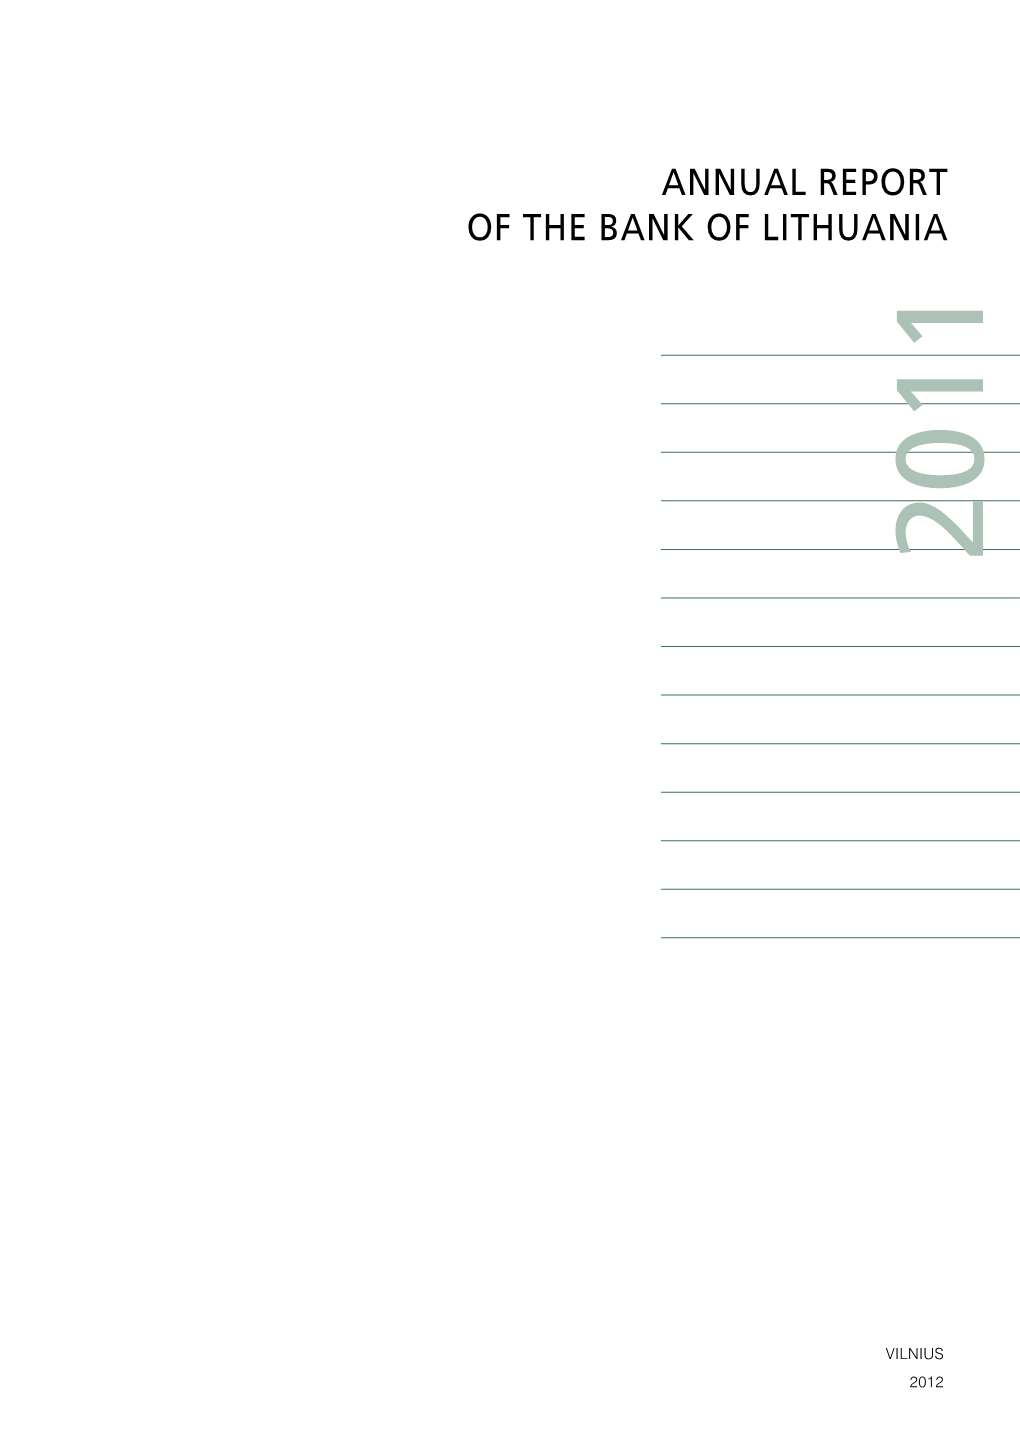 Annual Report of the Bank of Lithuania 2011